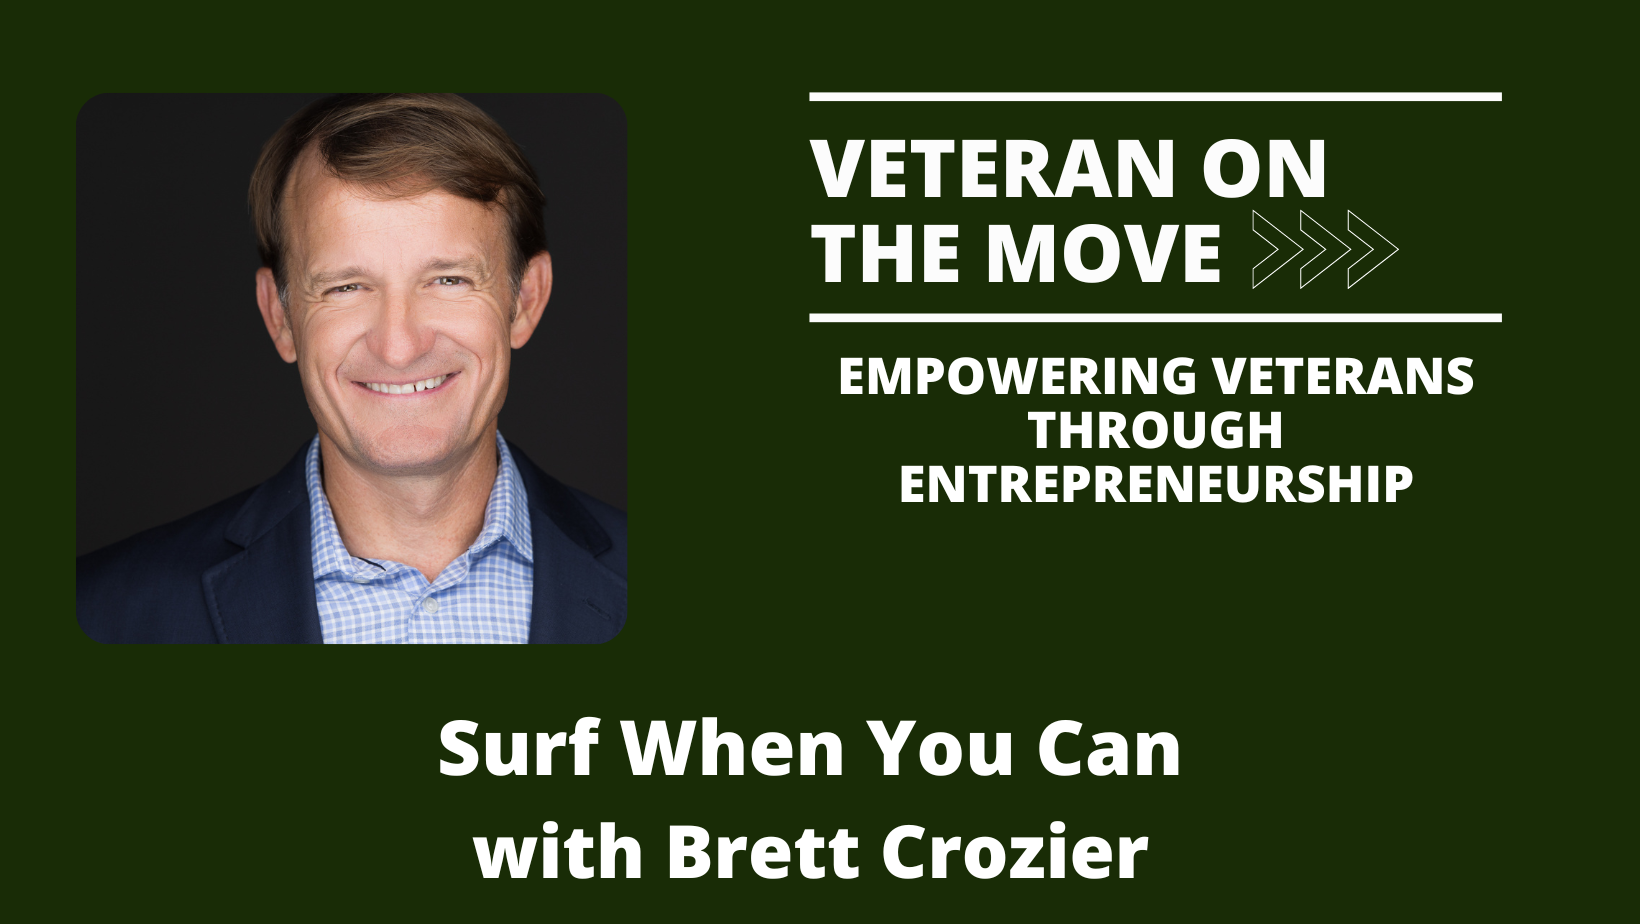 Surf When You Can with Brett Crozier